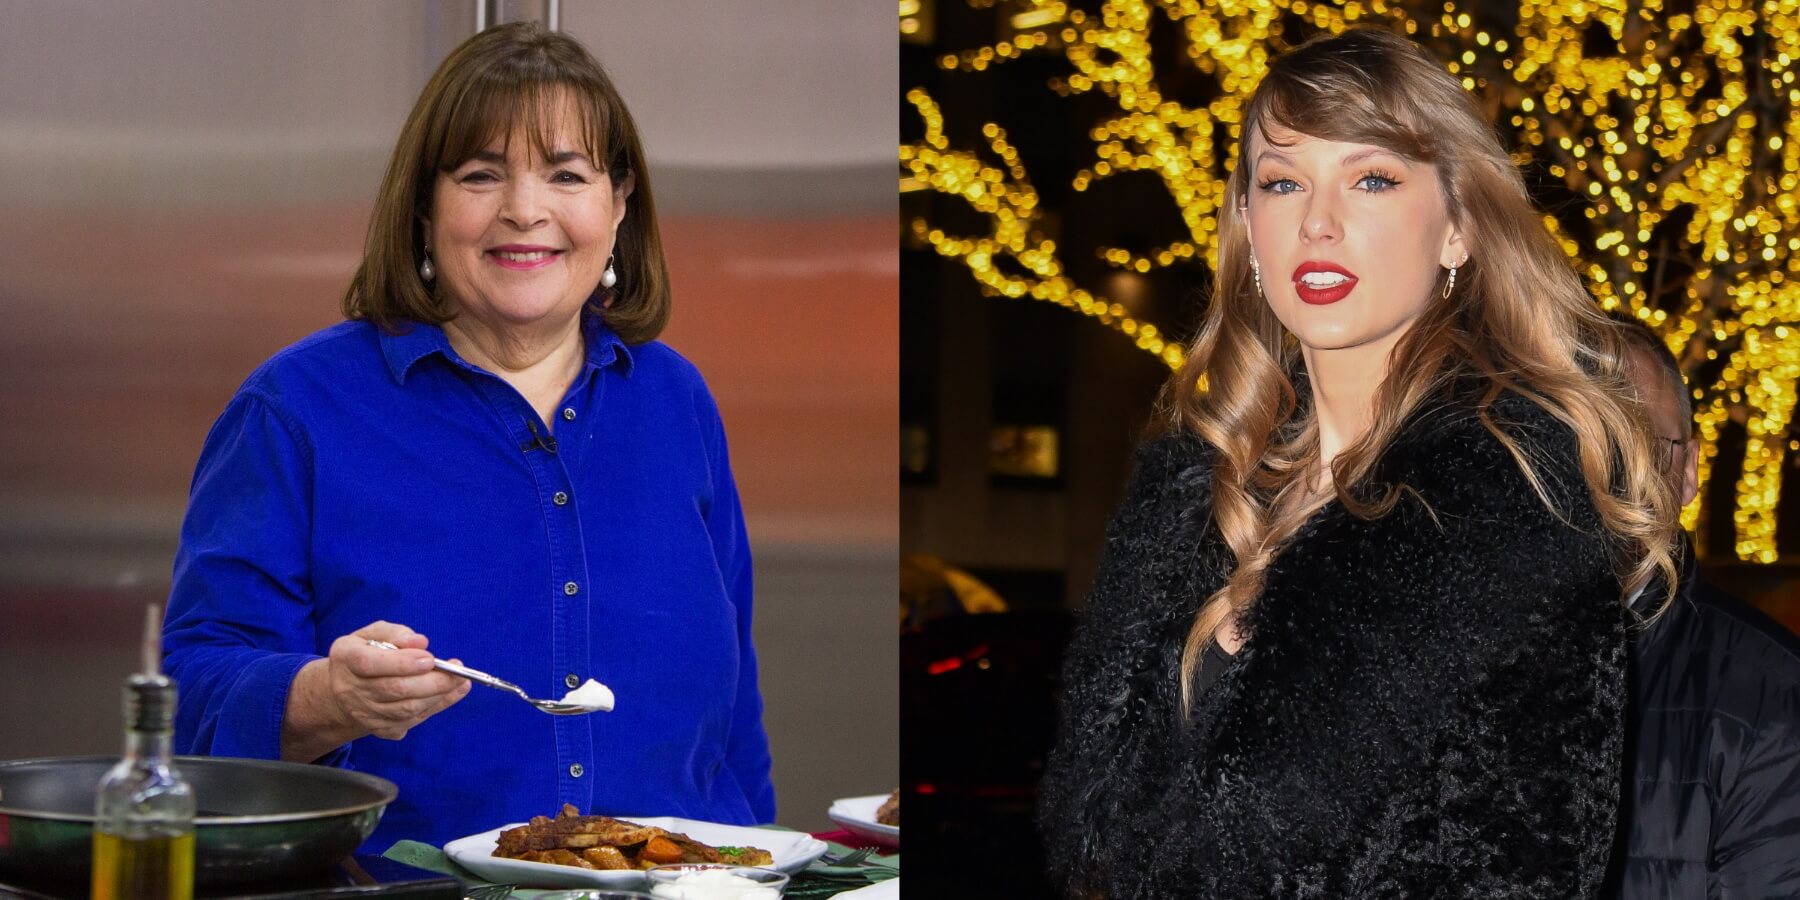 Taylor Swift uses Ina Garten's Spaghetti and Meatballs recipe as her go-to-dinner party favorite.